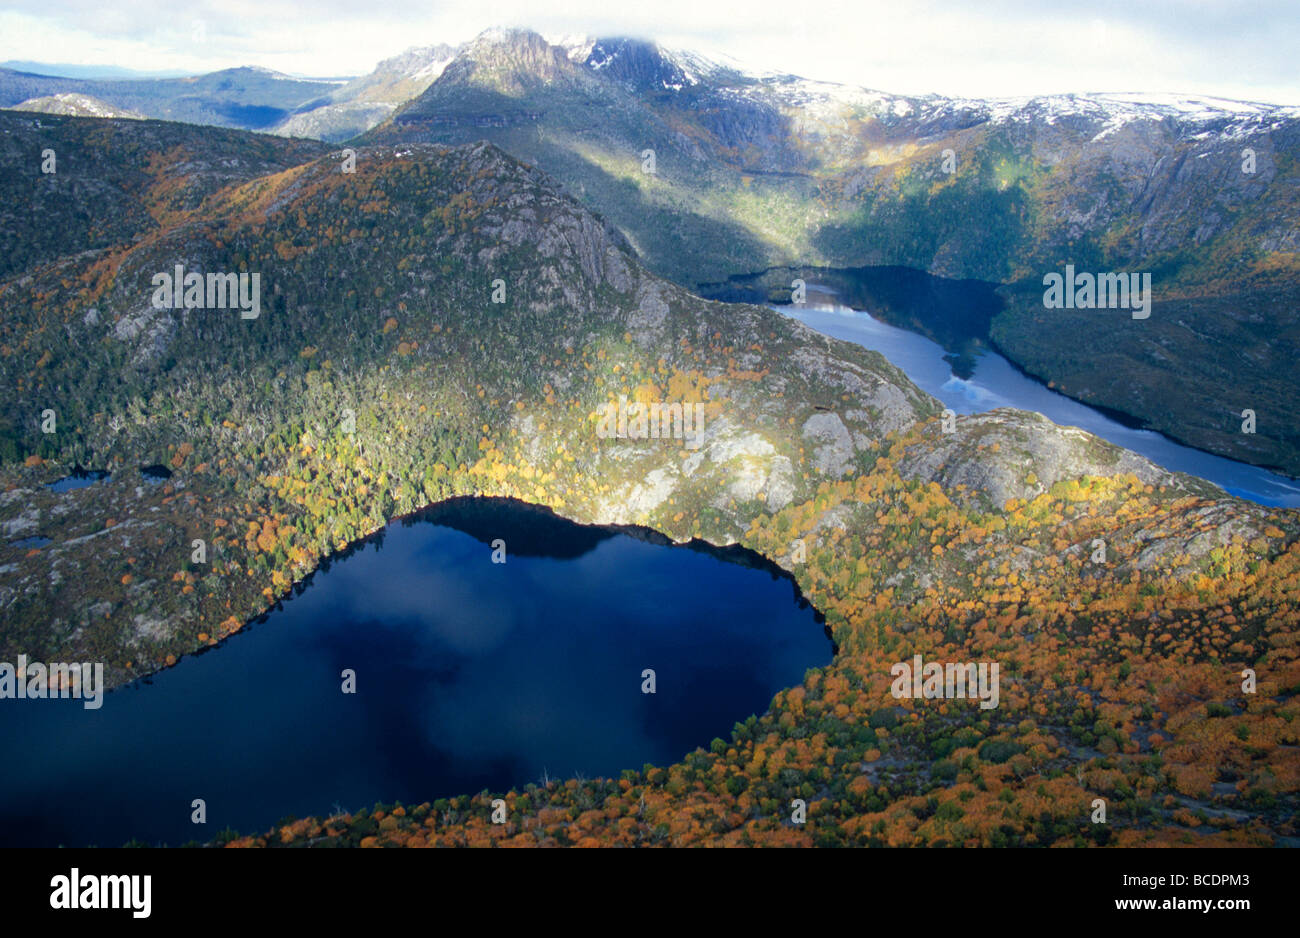 An aerial view of Deciduous Beech, Nothofagus gunnii, and Lake Hanson. Stock Photo